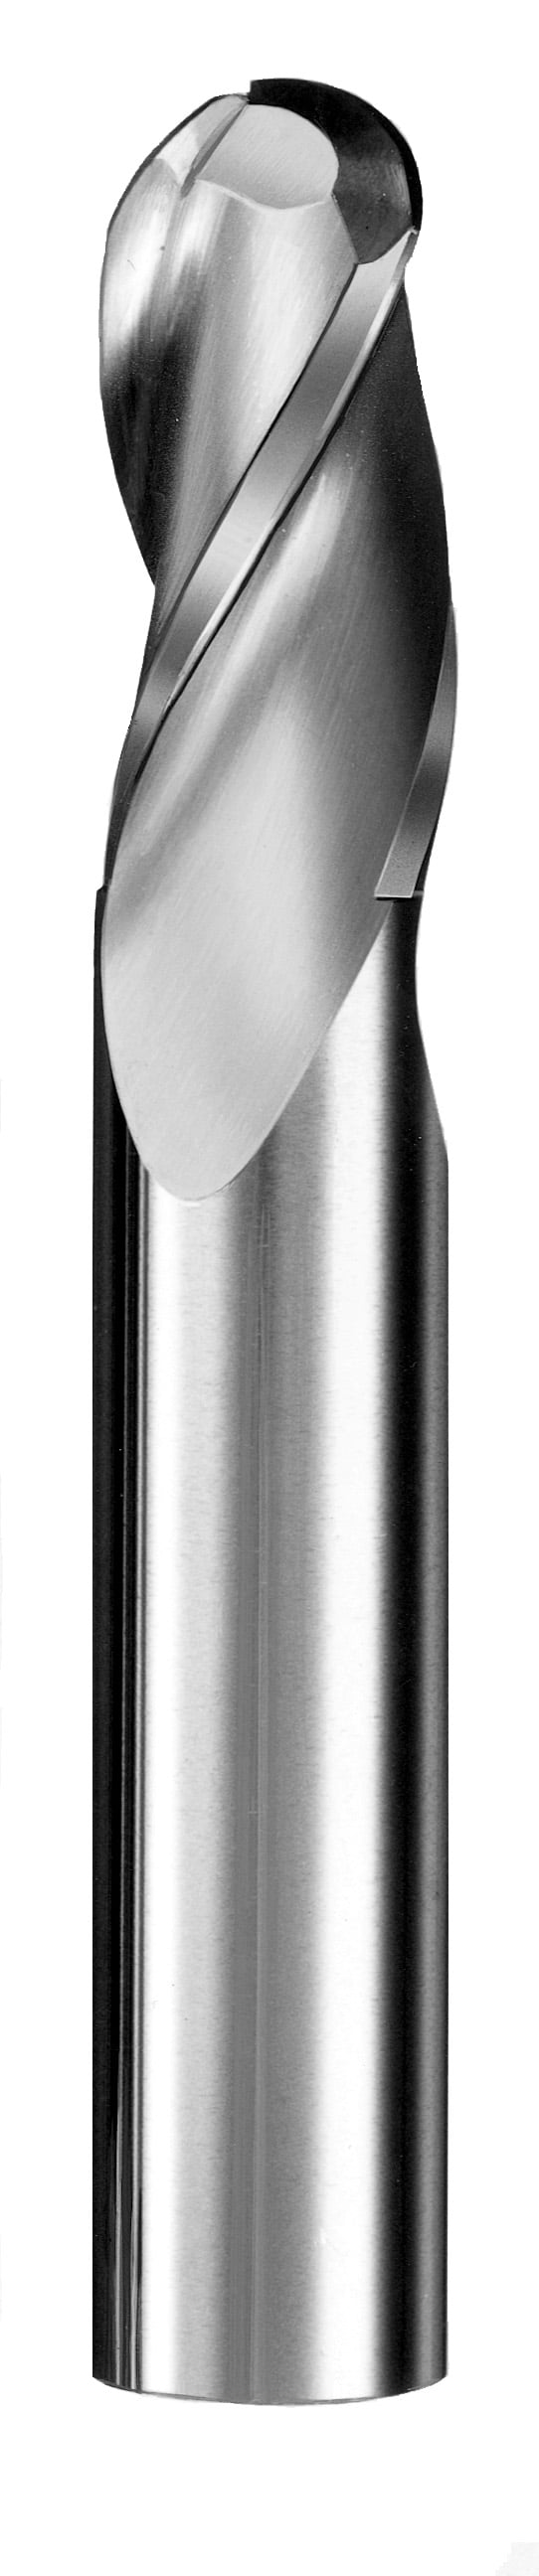 1/32" Dia, 3 Flute, Ball Nose End Mill - 30504